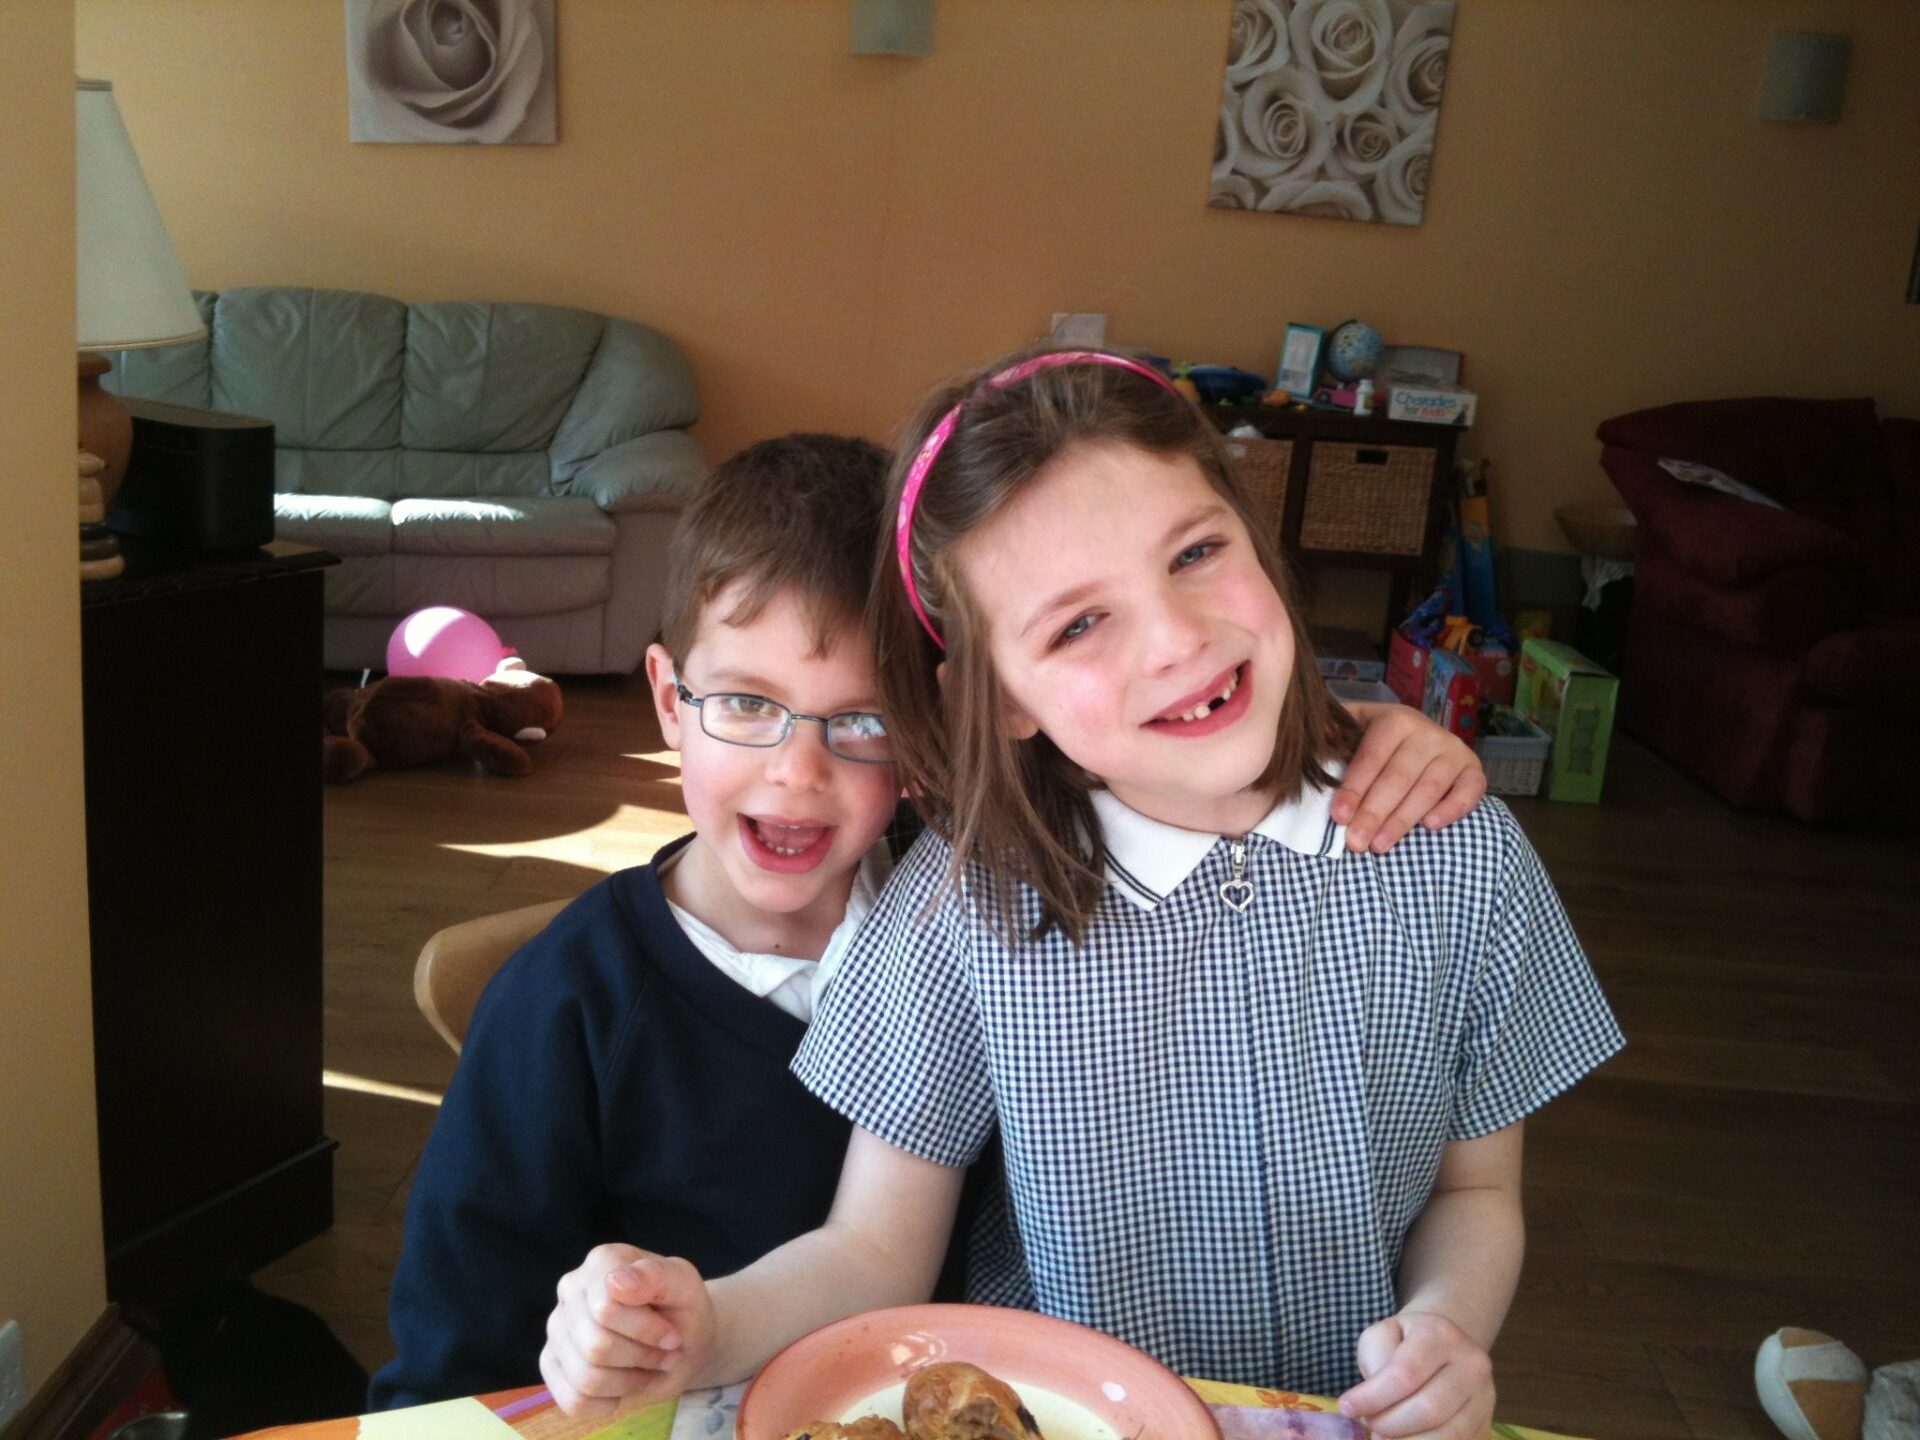 Grinning at mummys MAD Blog Award short-listing; but with school uniforms this time!